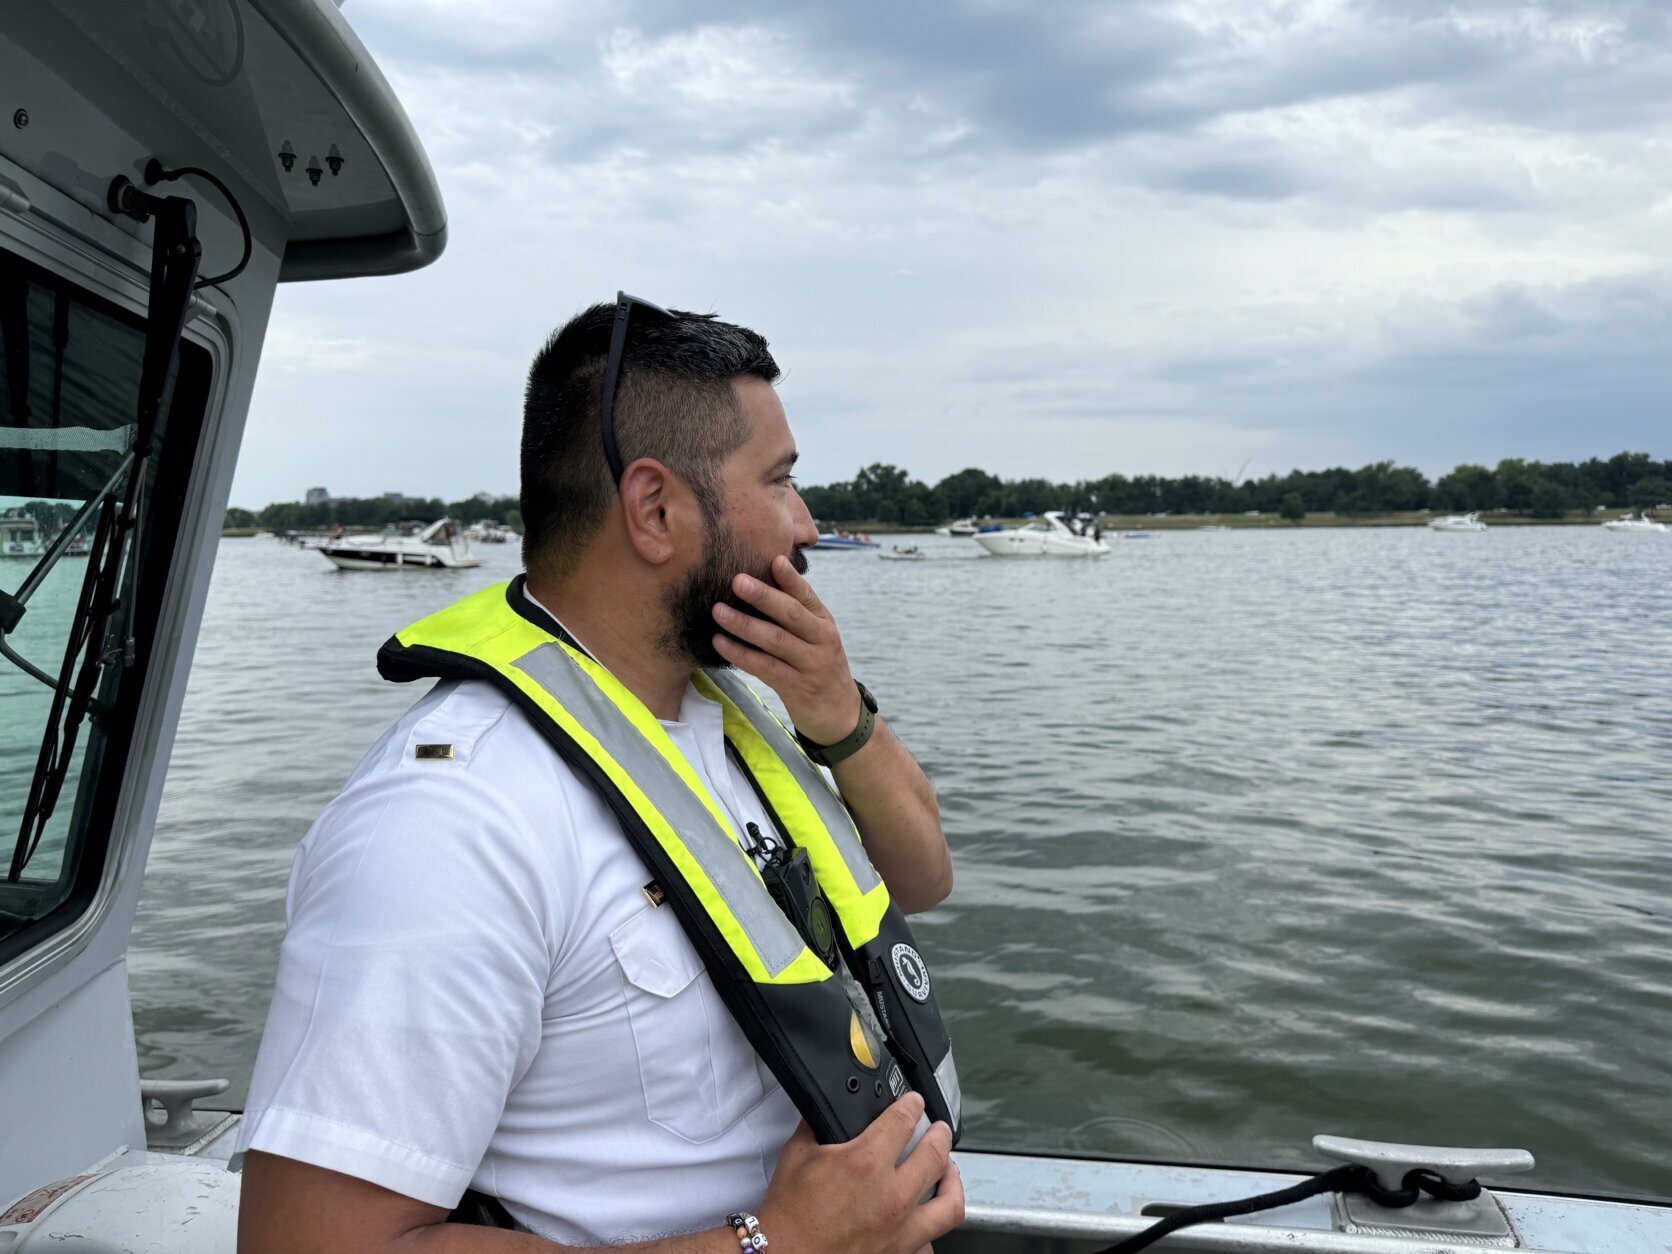 Lt. Andrew Horos looks out at the water